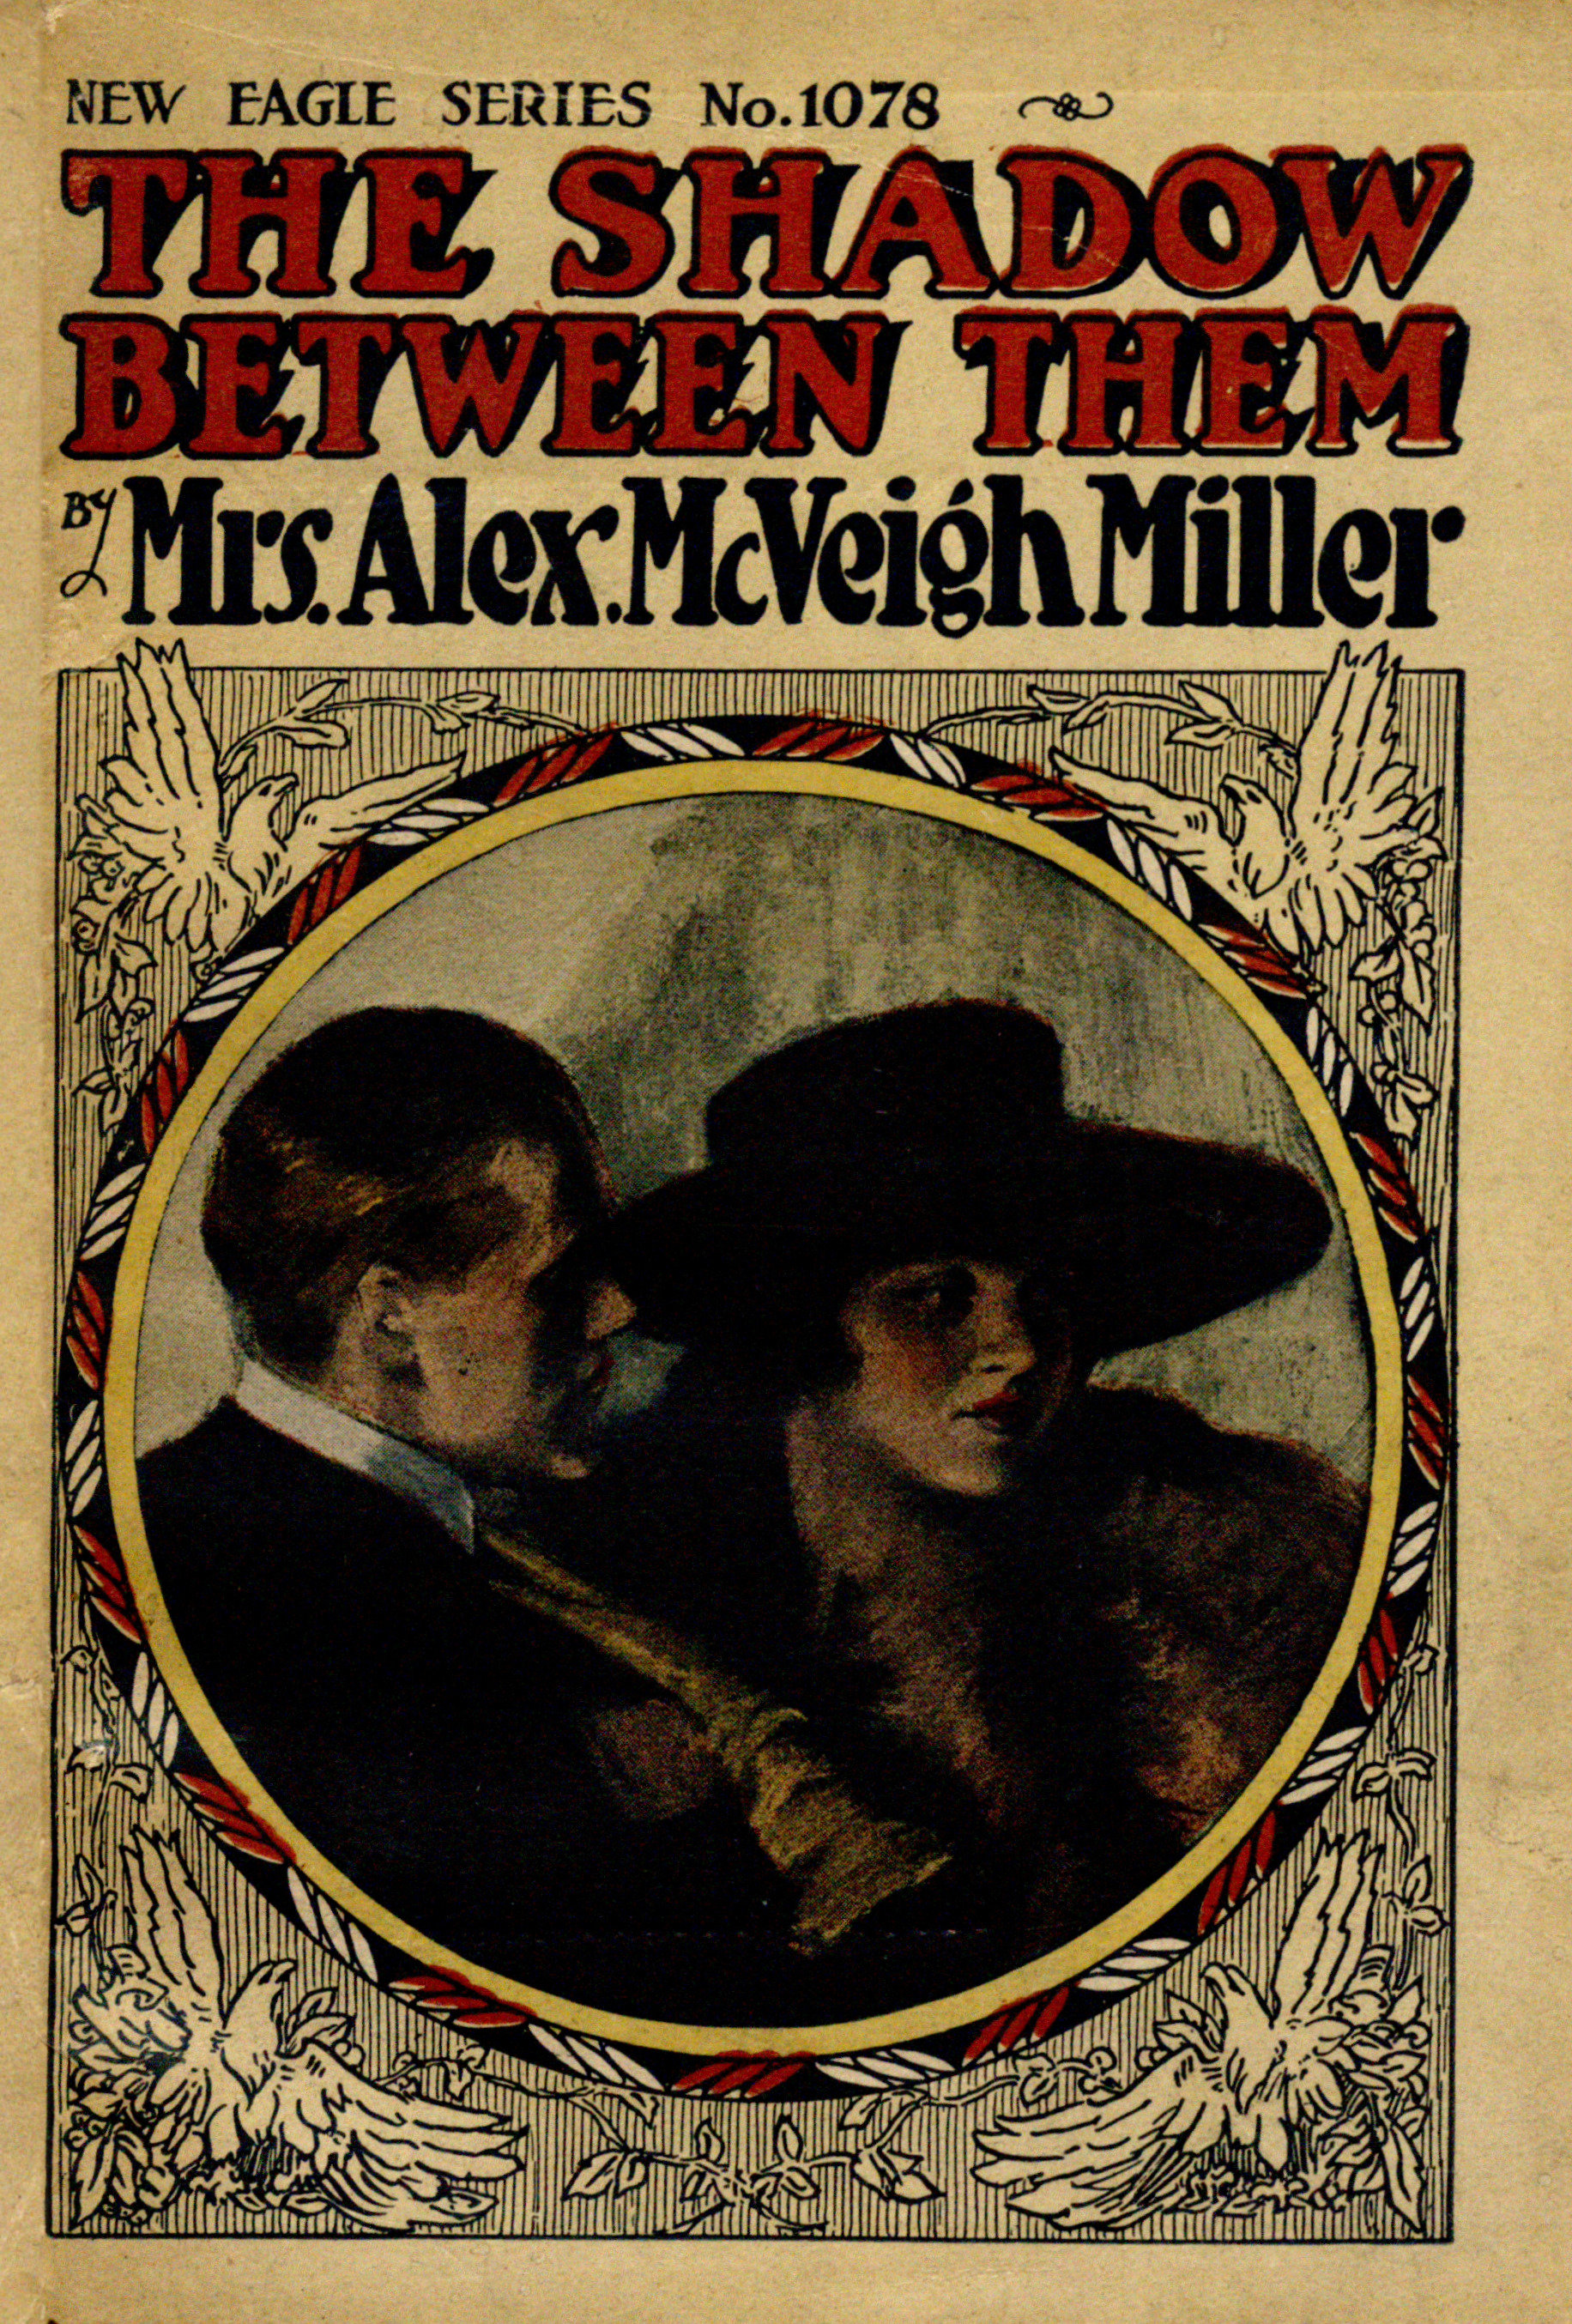 The Shadow Between Them, by Mrs. Alex. McVeigh Miller—A Project